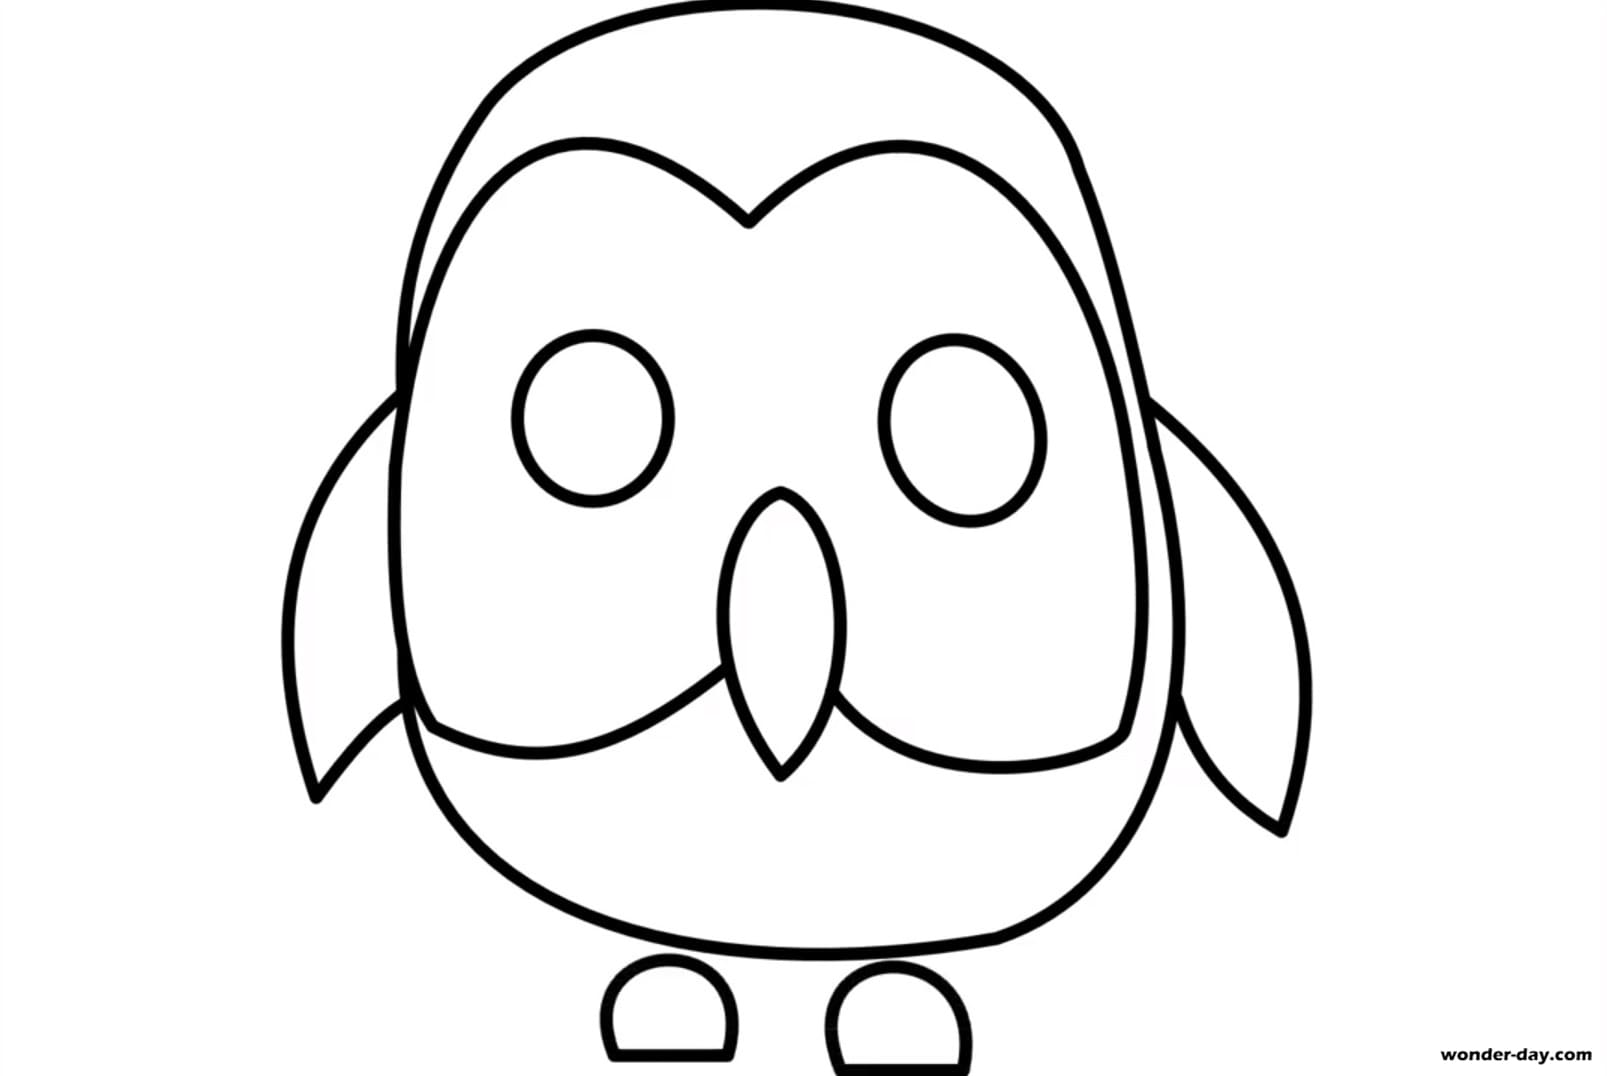 Adopt Me Coloring Pages Coloring Home - roblox adopt me sloth coloring pages